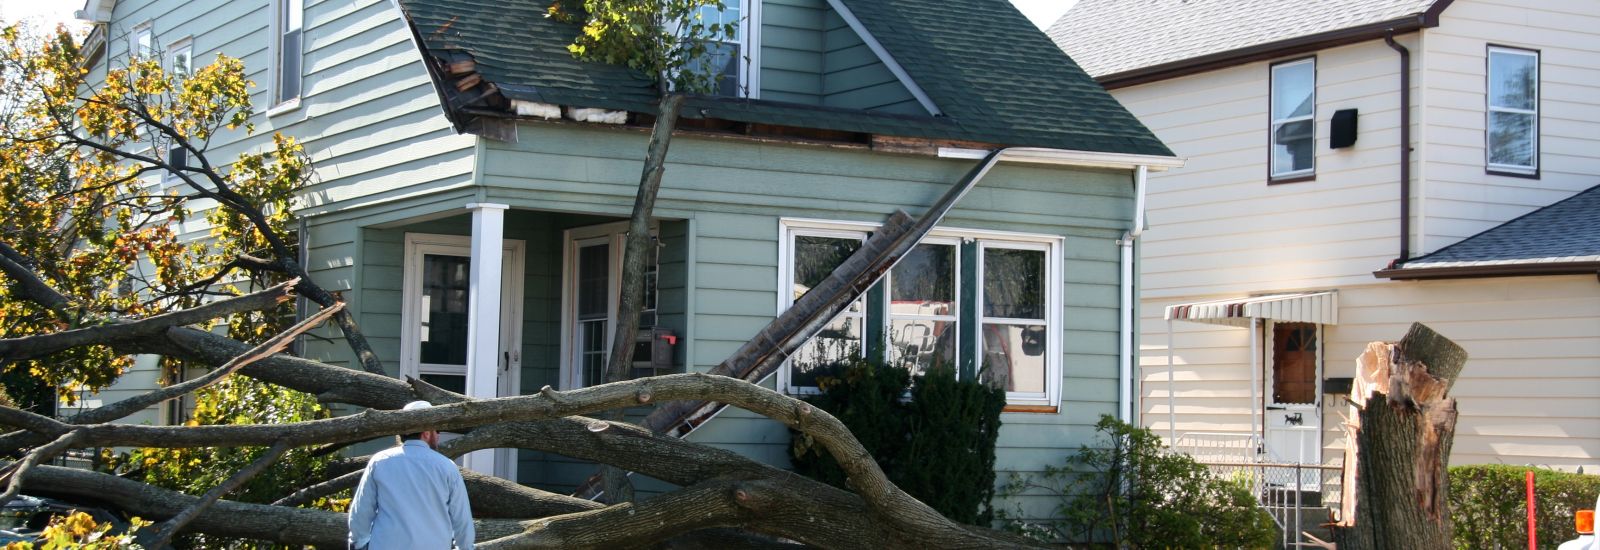 Signs of Storm Damage on Roofs